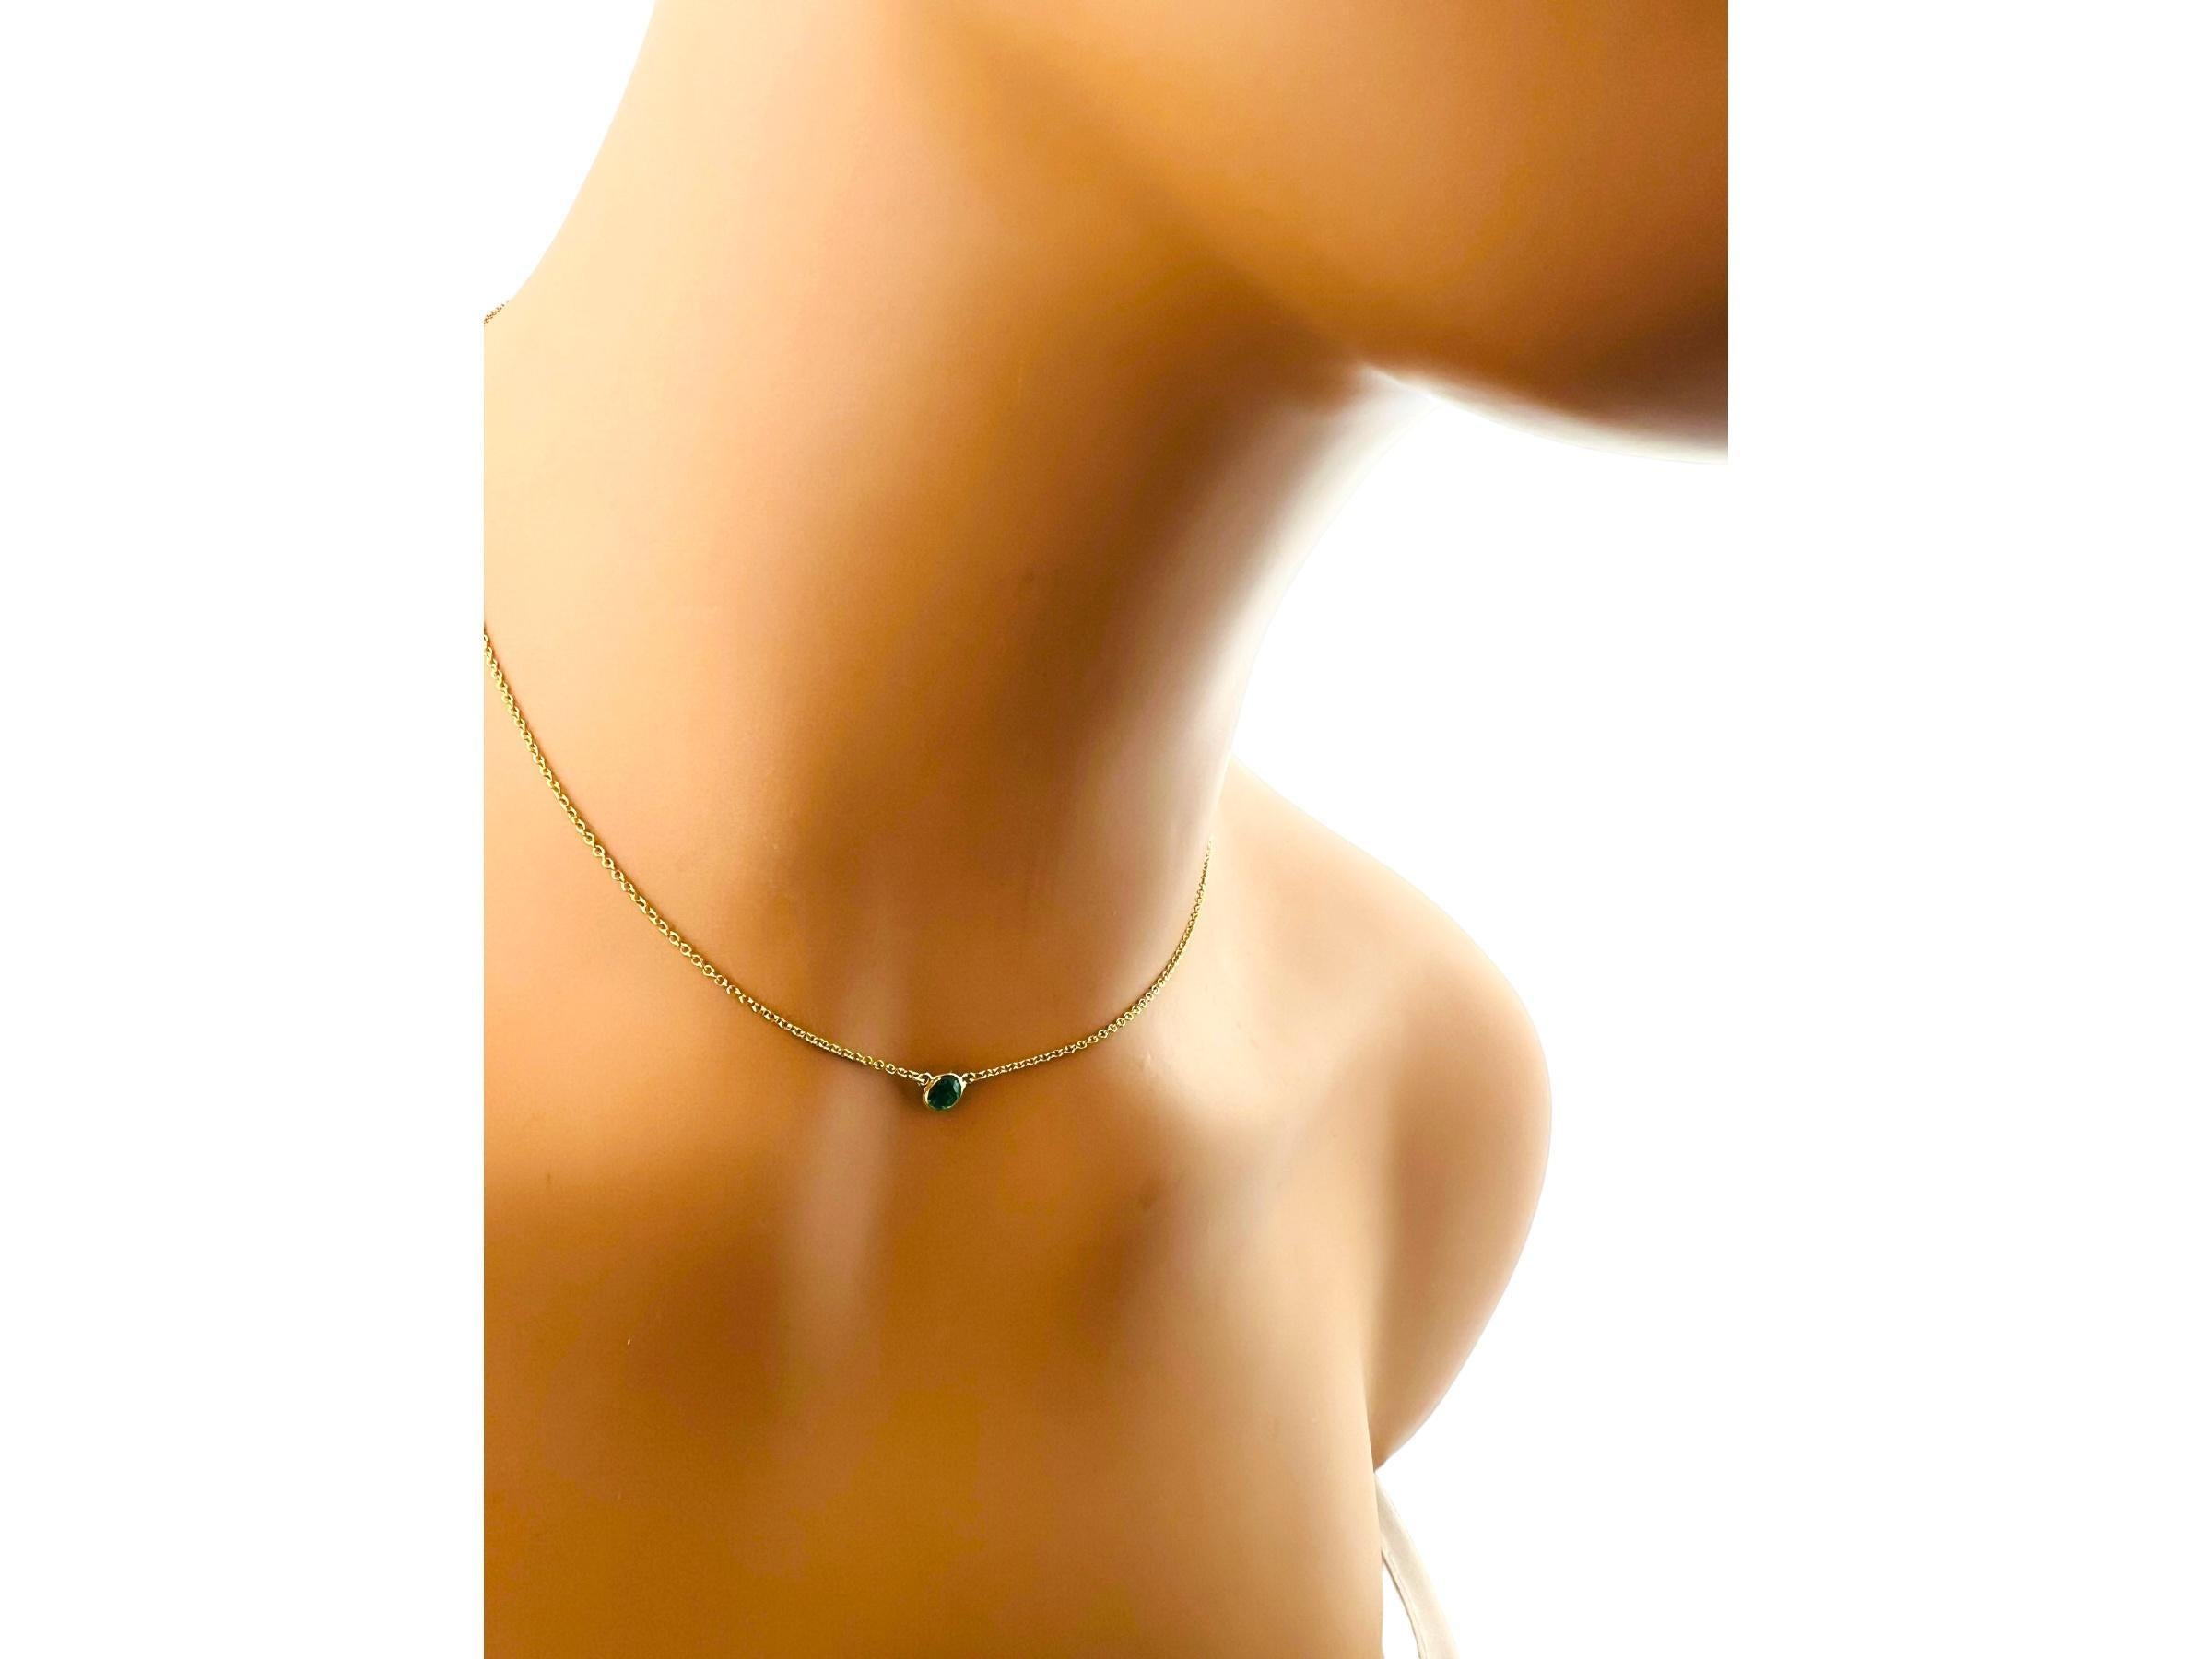 Women's Tiffany & Co. Elsa Peretti 18K Yellow Gold Emerald Color by Yard Necklace #16316